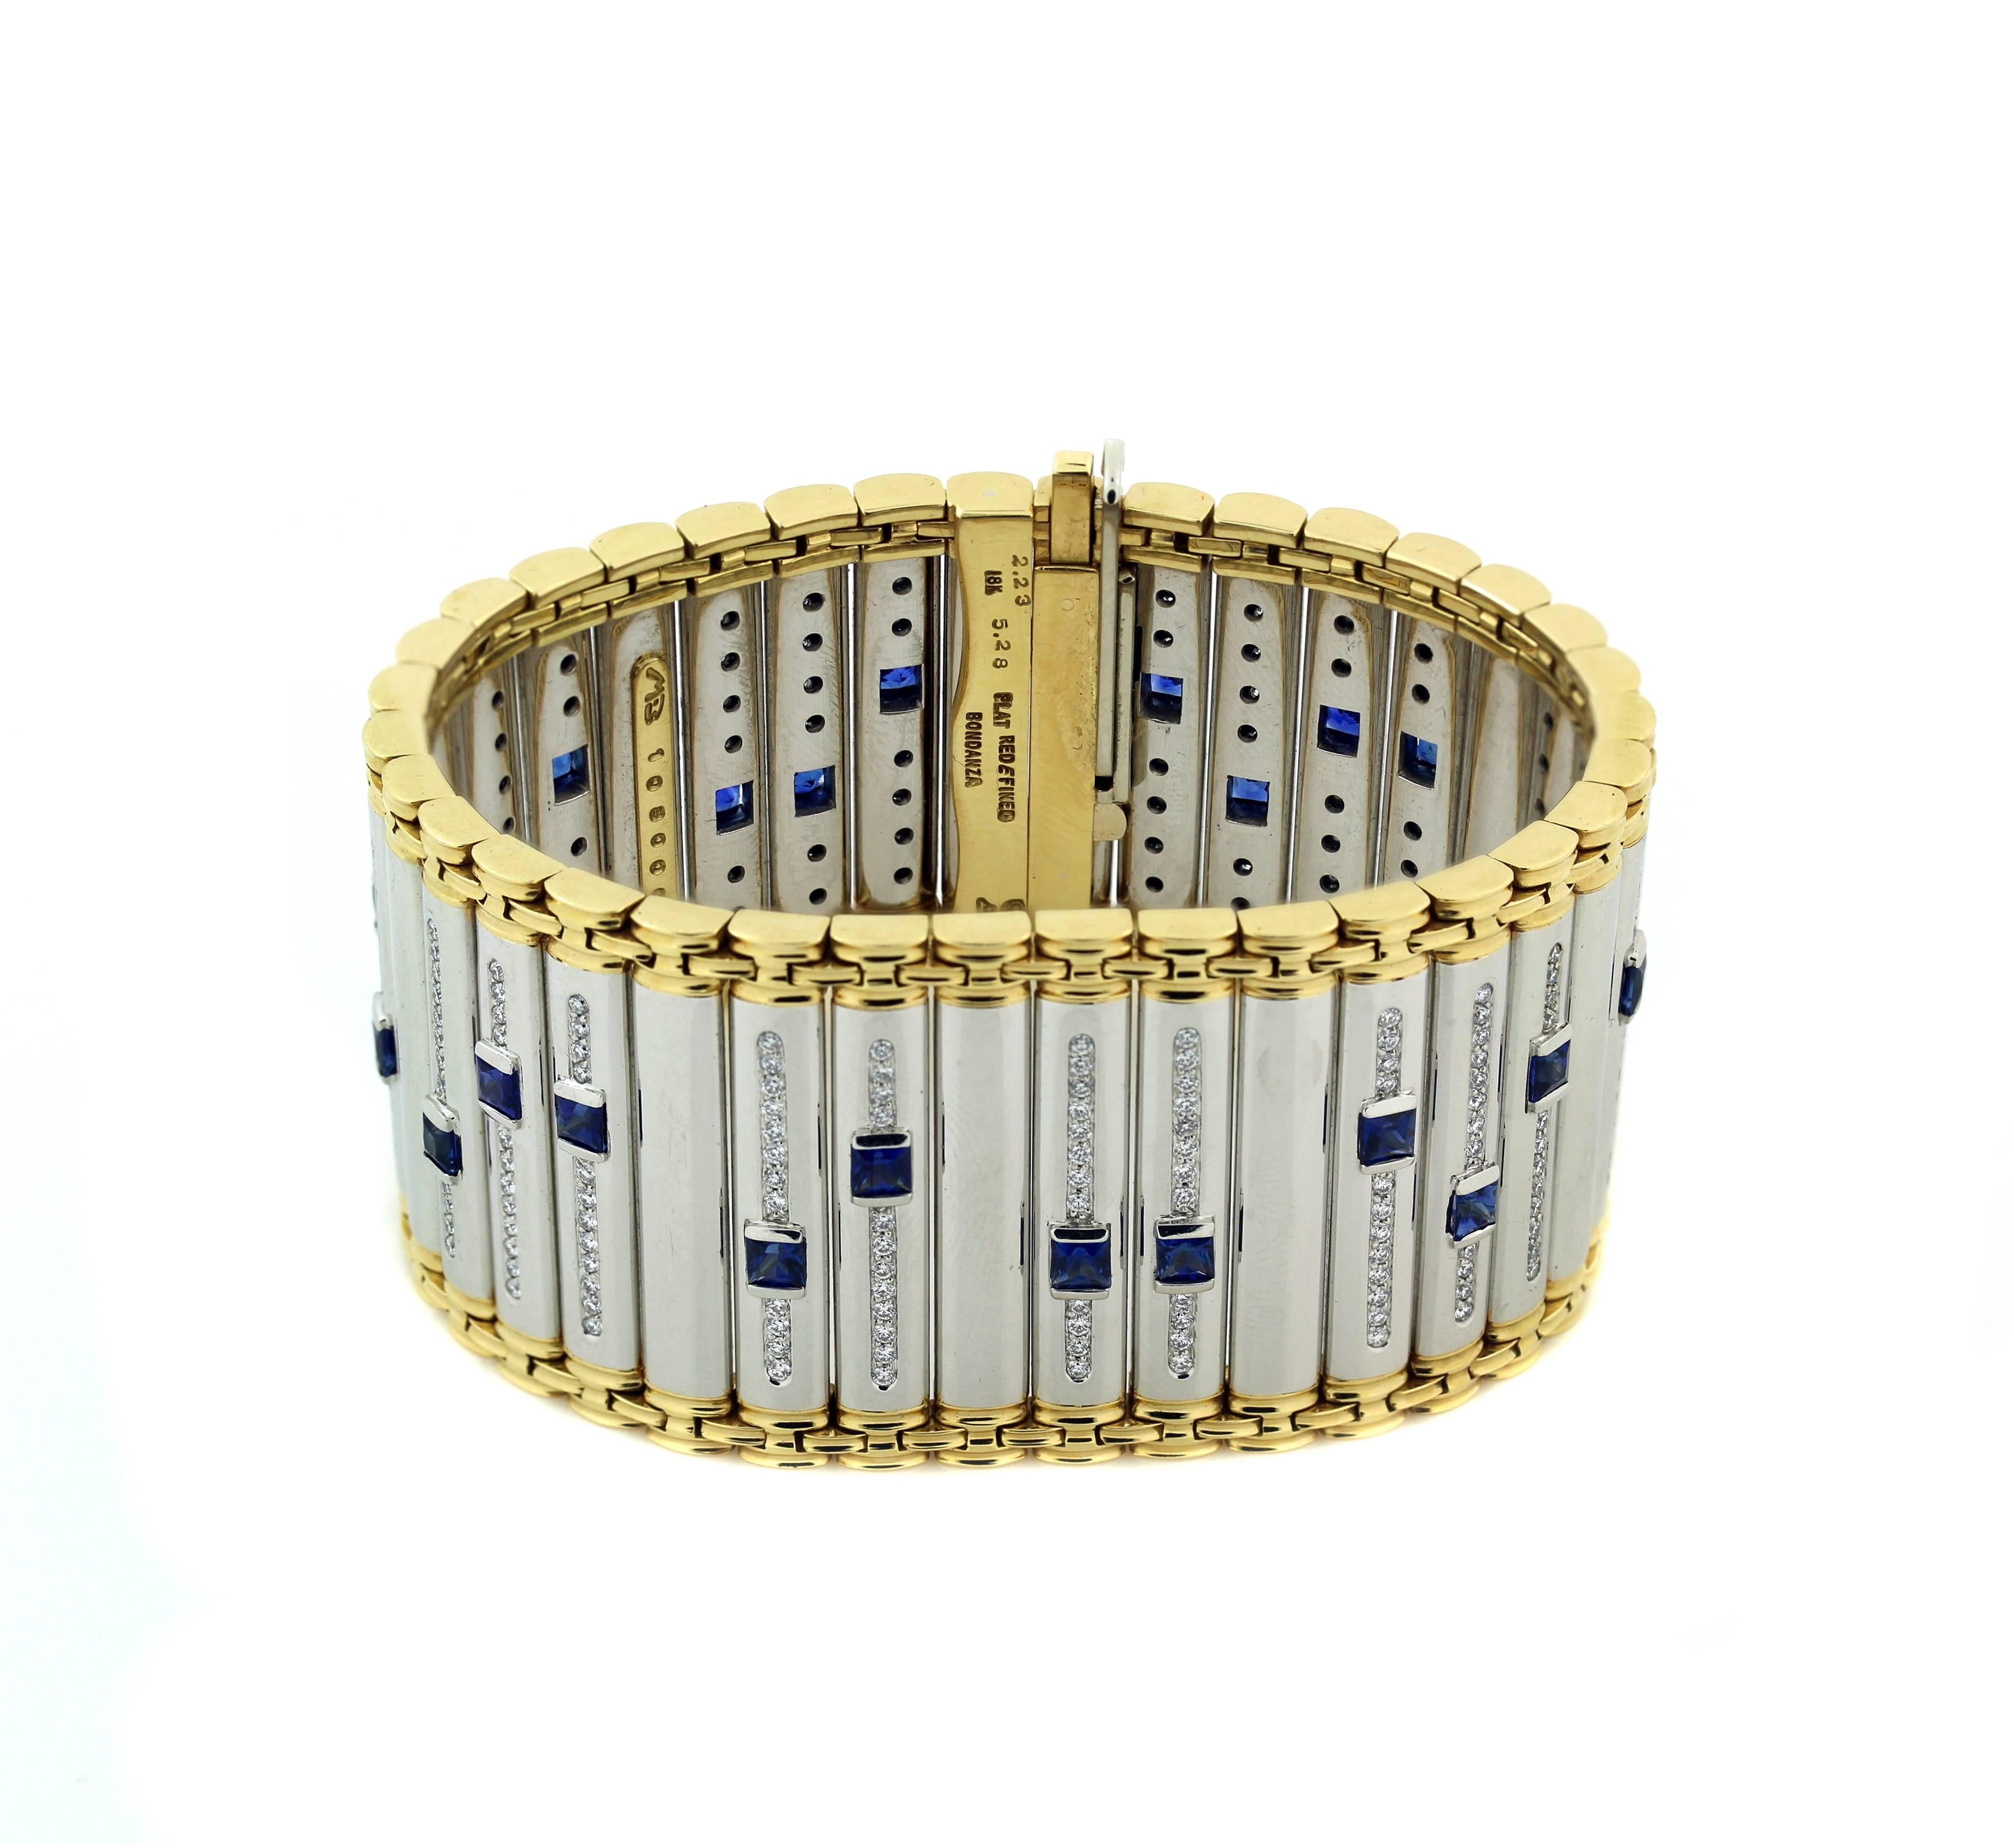 Platinum and 18K Yellow Gold Bracelet with Princess cut Blue sapphires and diamonds by Michael Bondanza

288 round white diamonds F-G color VS clarity make up bracelet. Apprx: 2.23ct. (stamped on inside of bracelet)

24 princess cut blue sapphires